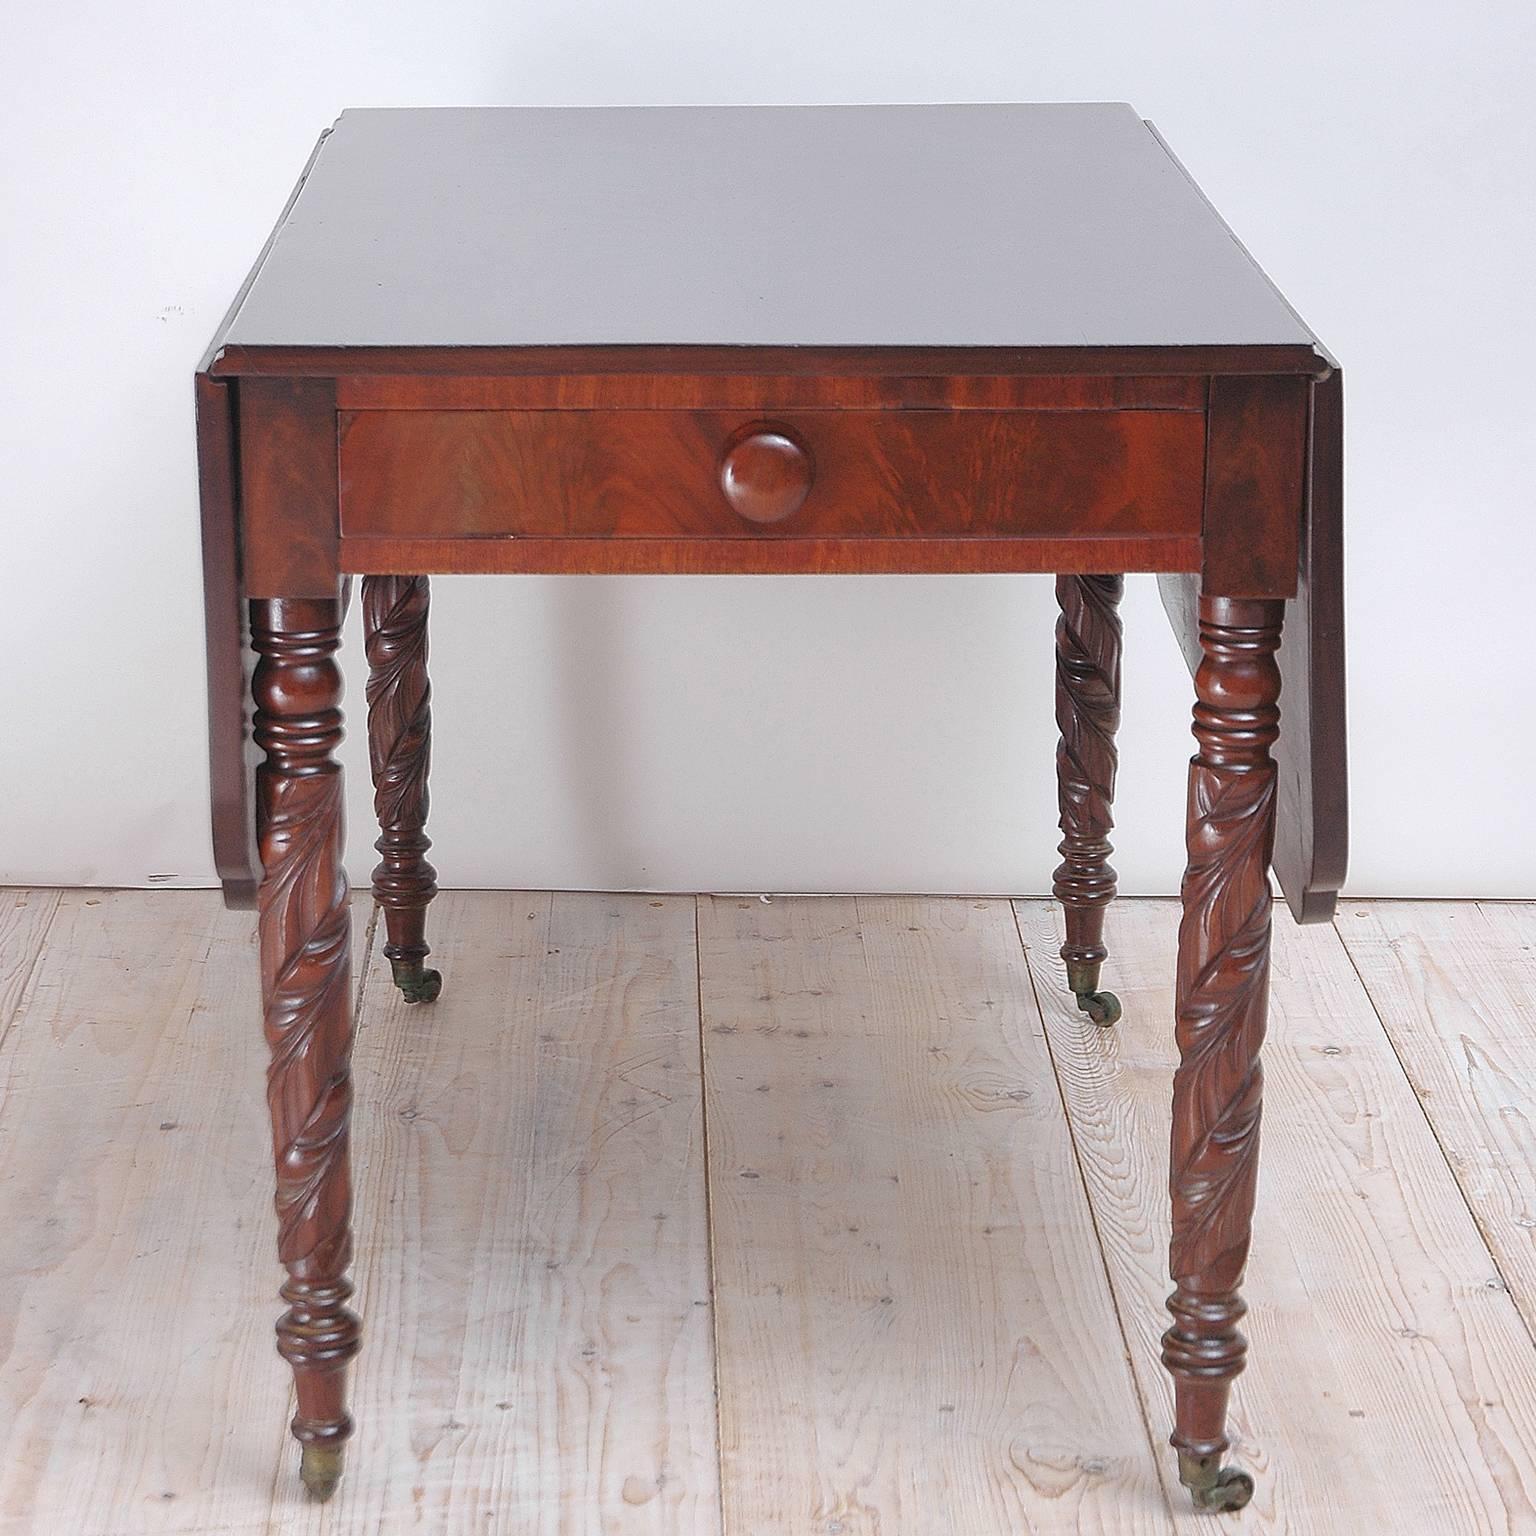 A federal table in mahogany with drop-leaves, on turned legs with large leaf carvings and ending in casters. Offers one drawer with original wooden pull. 
Note: You should always request a shipping quote.
Quoted amounts are an estimate of what it